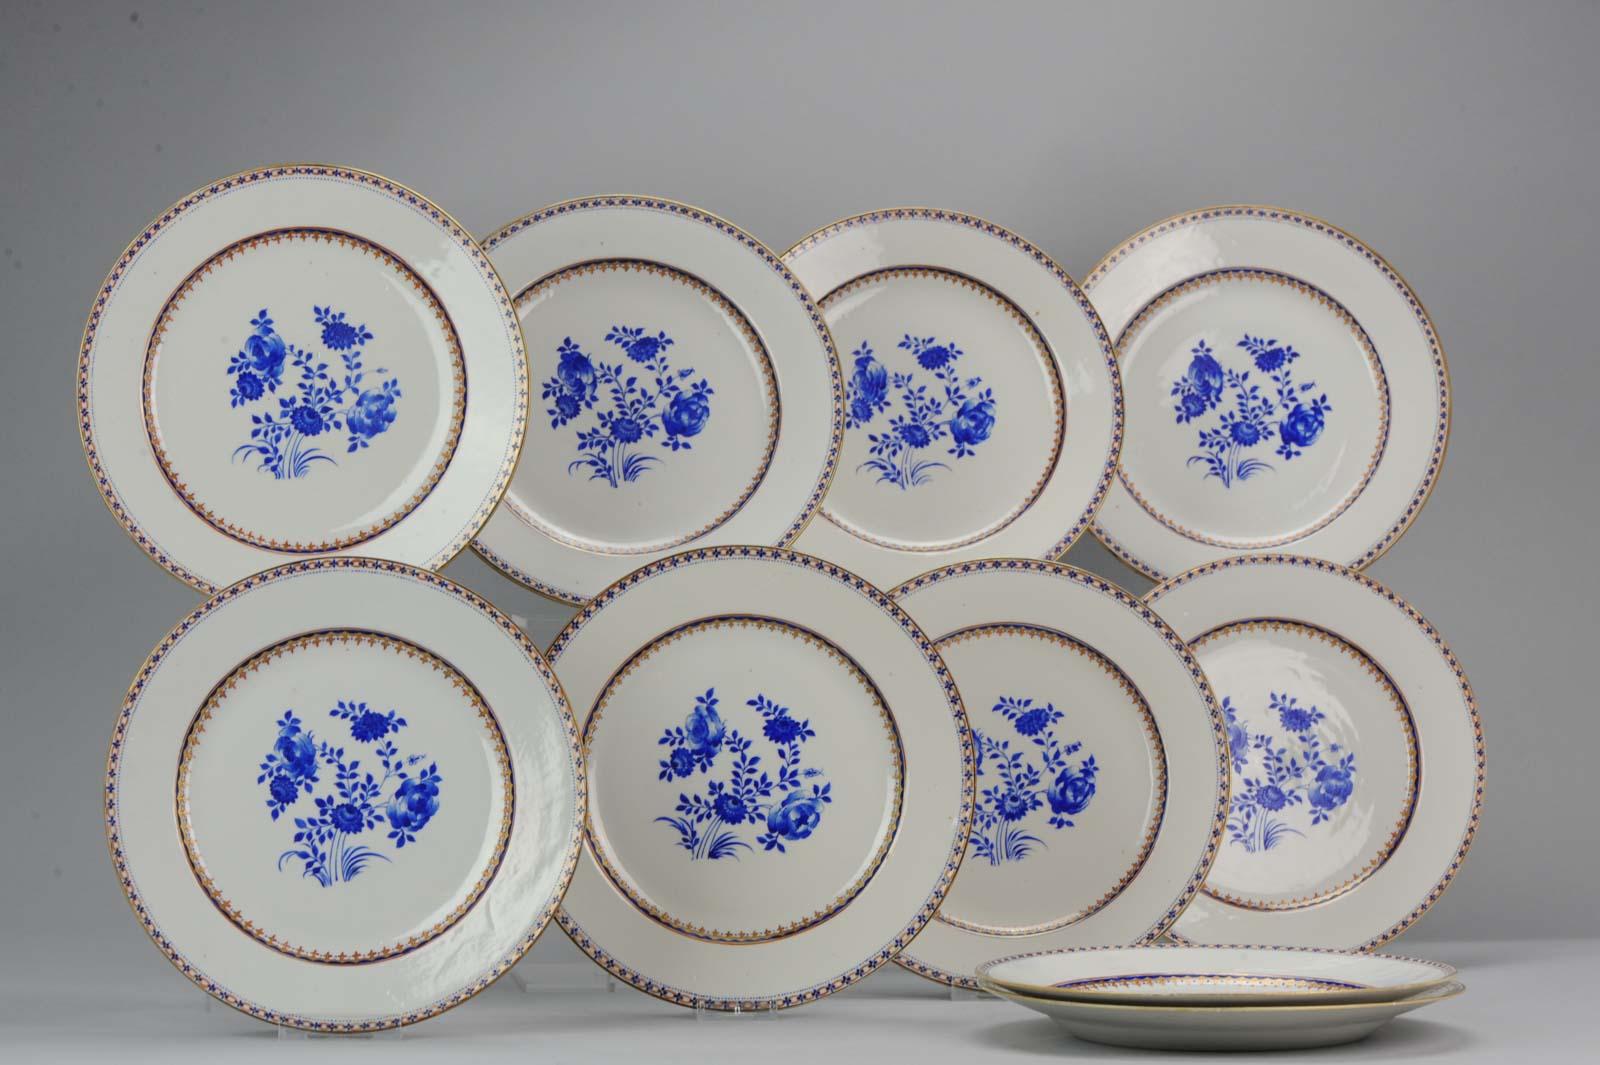 A very nicely decorated set of dinner plates plate. Very rare type of decoration. Dating to circa 1780-1790. Overglaze blue of superb cobalt color

Condition
Overall condition a (very good). 7 x Perfect, 1 with some frits, 1 with a chip and frit,